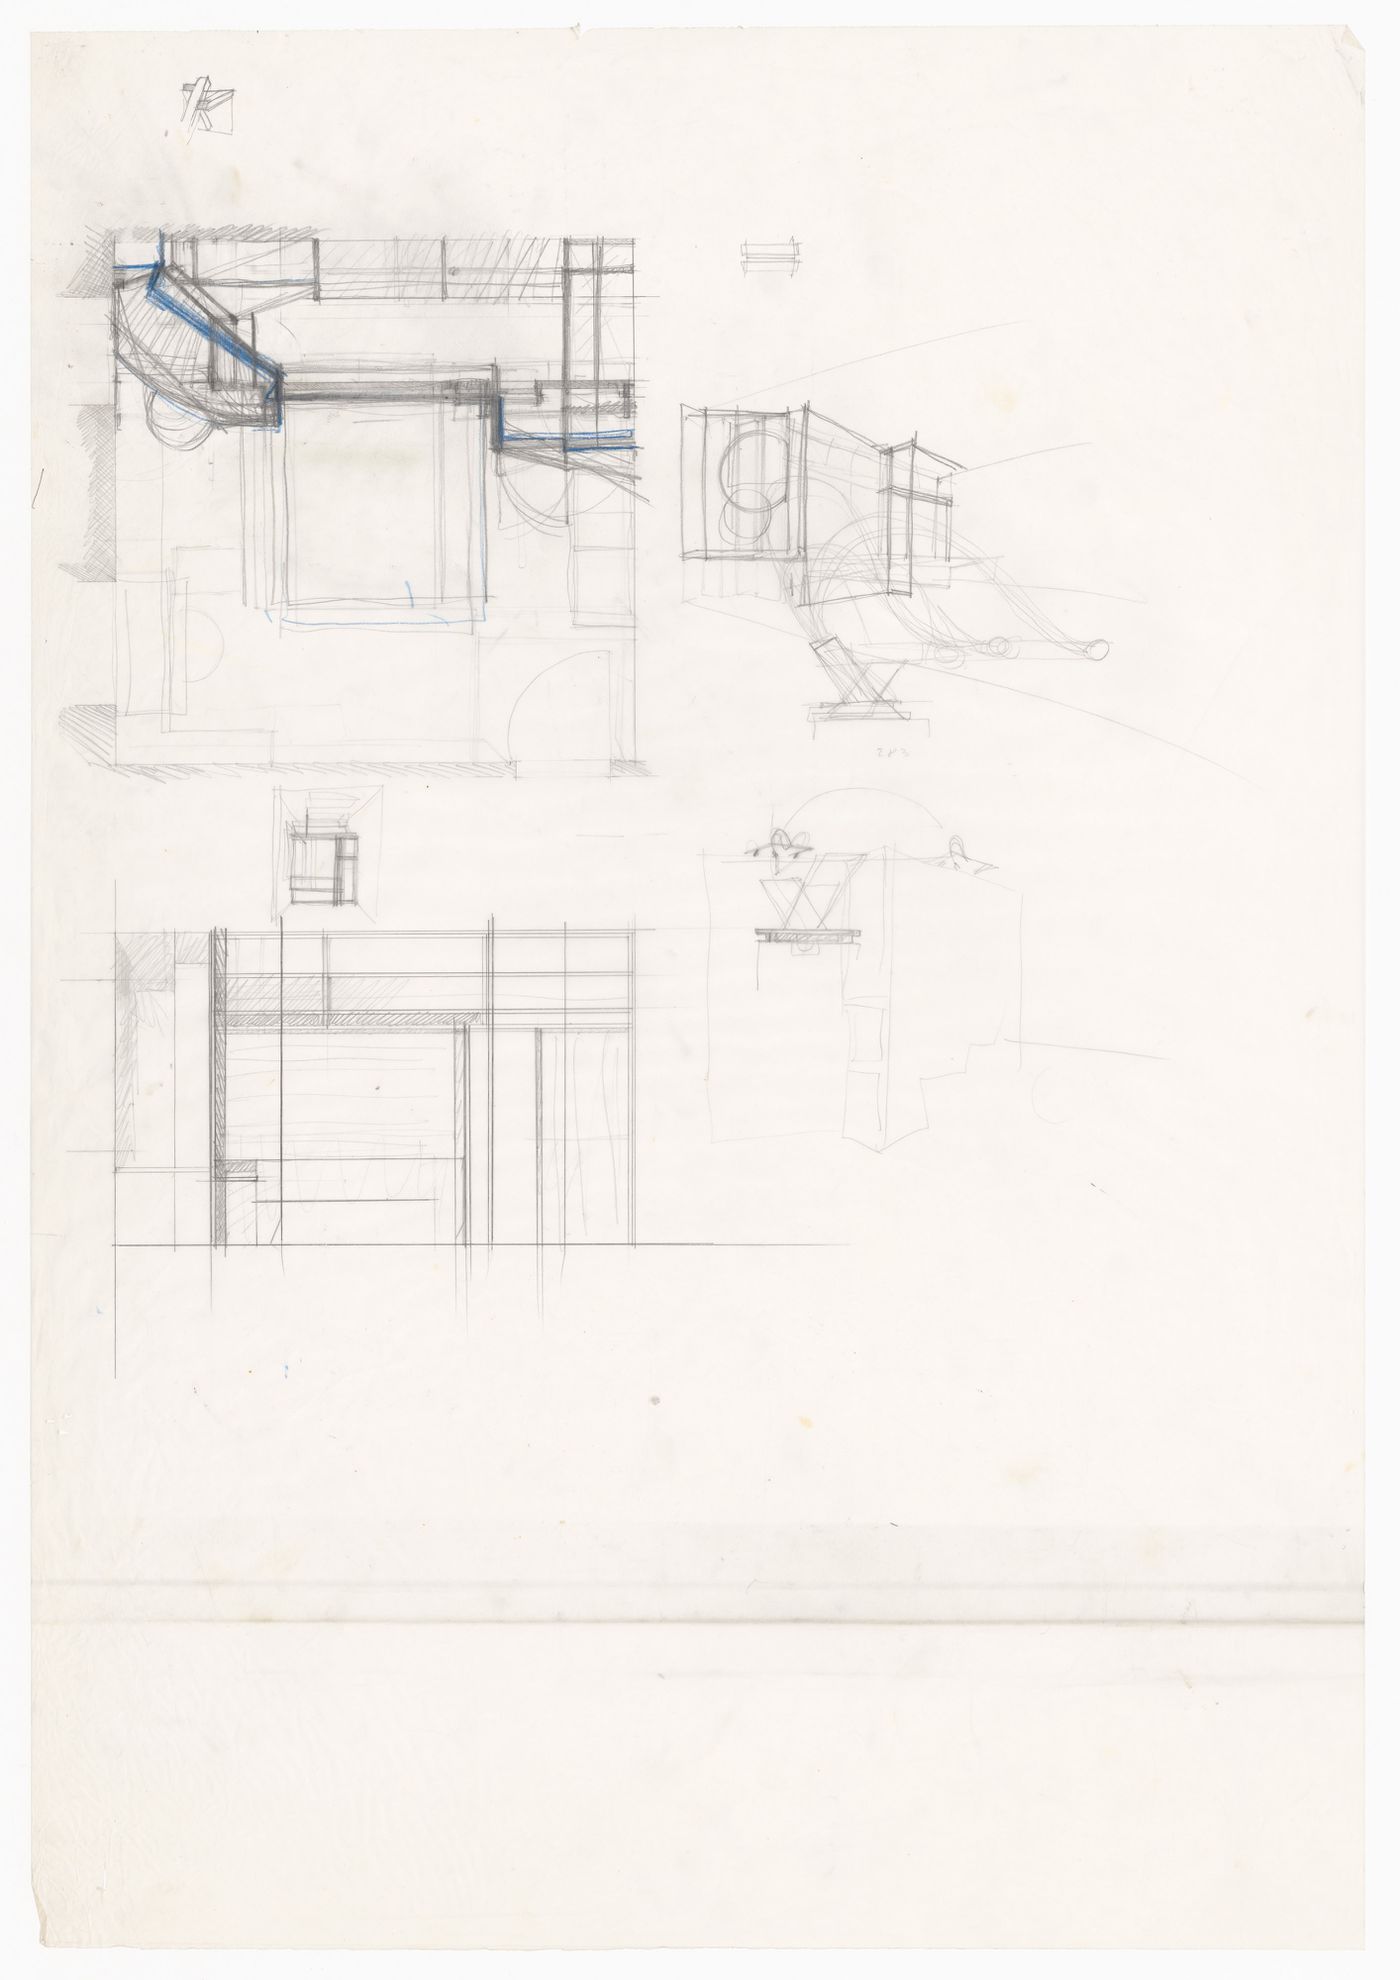 Sections and sketches for Casa De Paolini, Milan, Italy